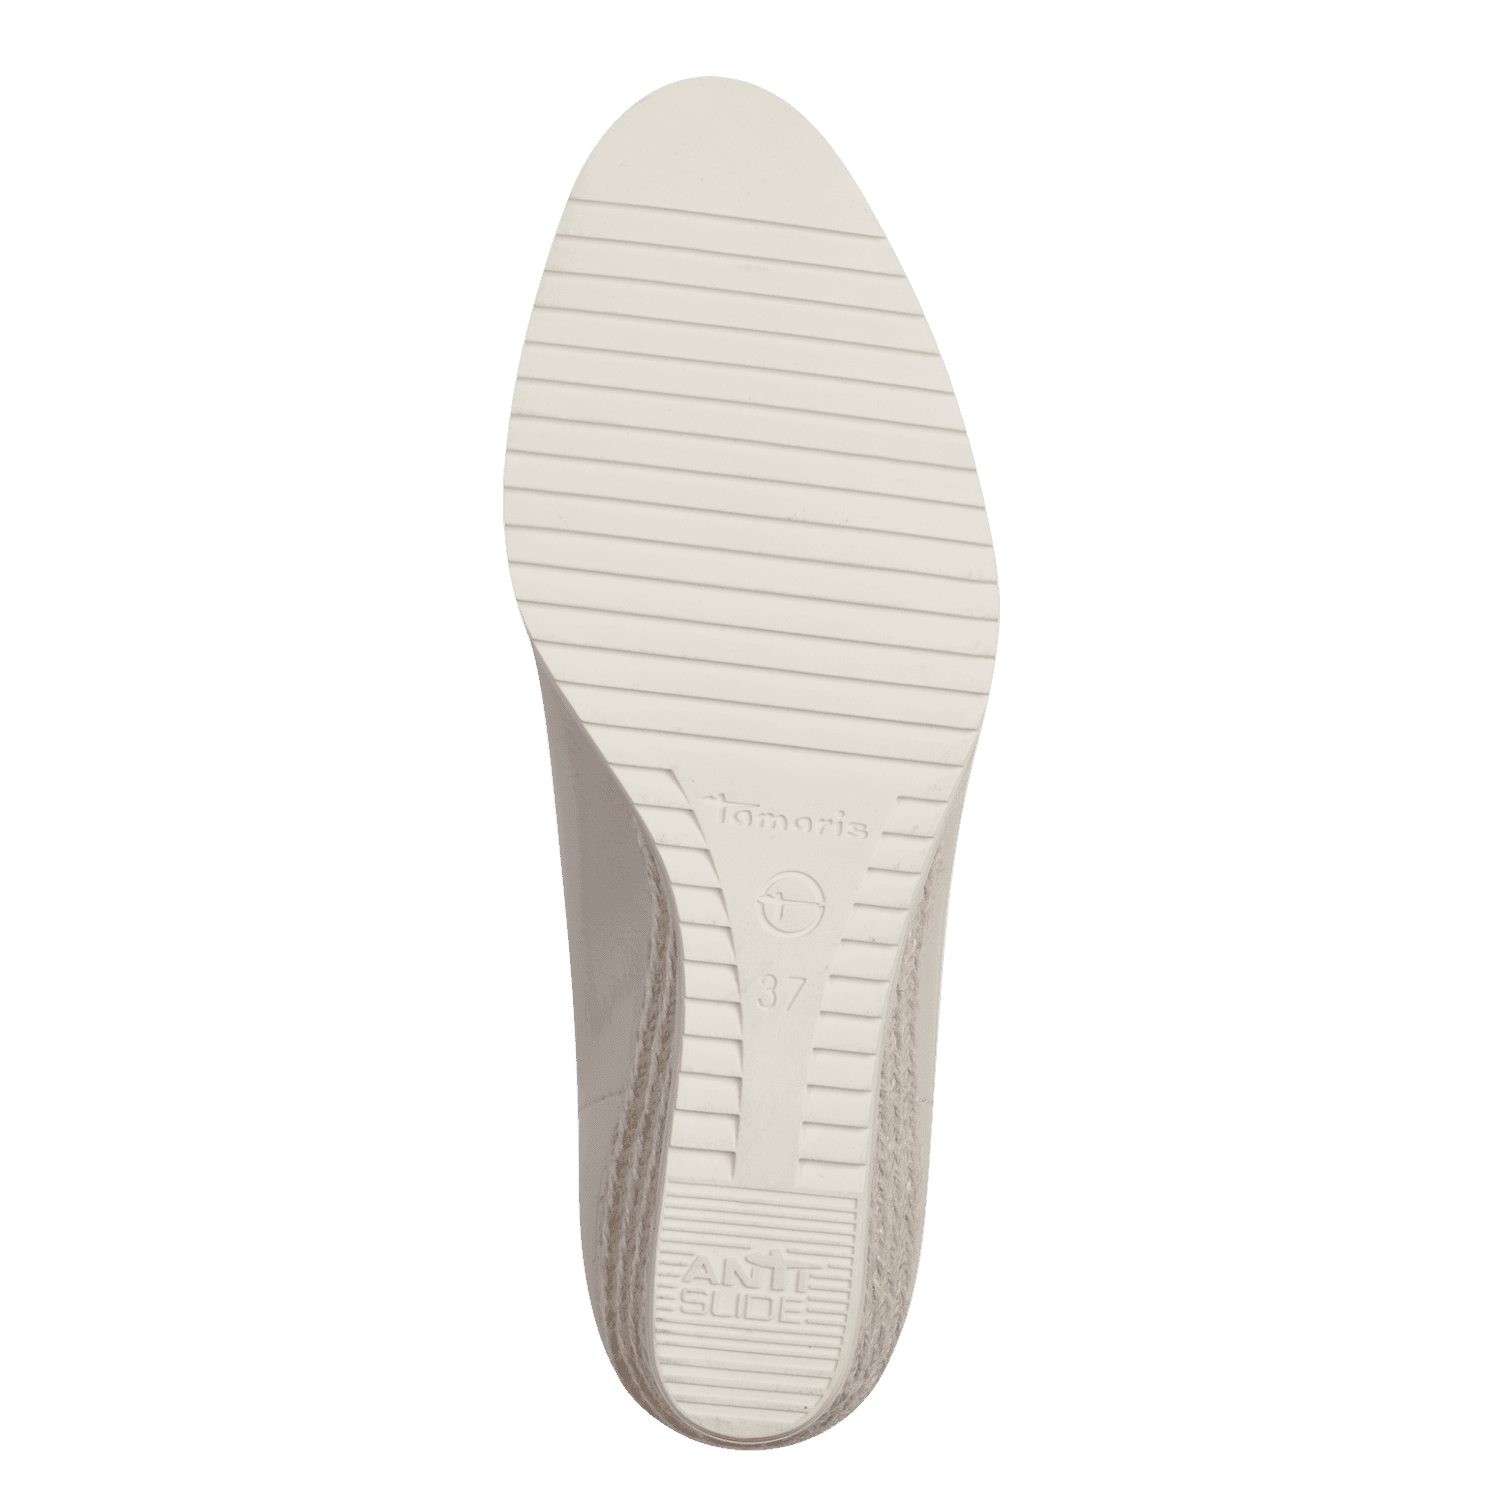  Angle view showing the ANTIslide and TOUCH-IT technology features of the Tamaris beige espadrille.